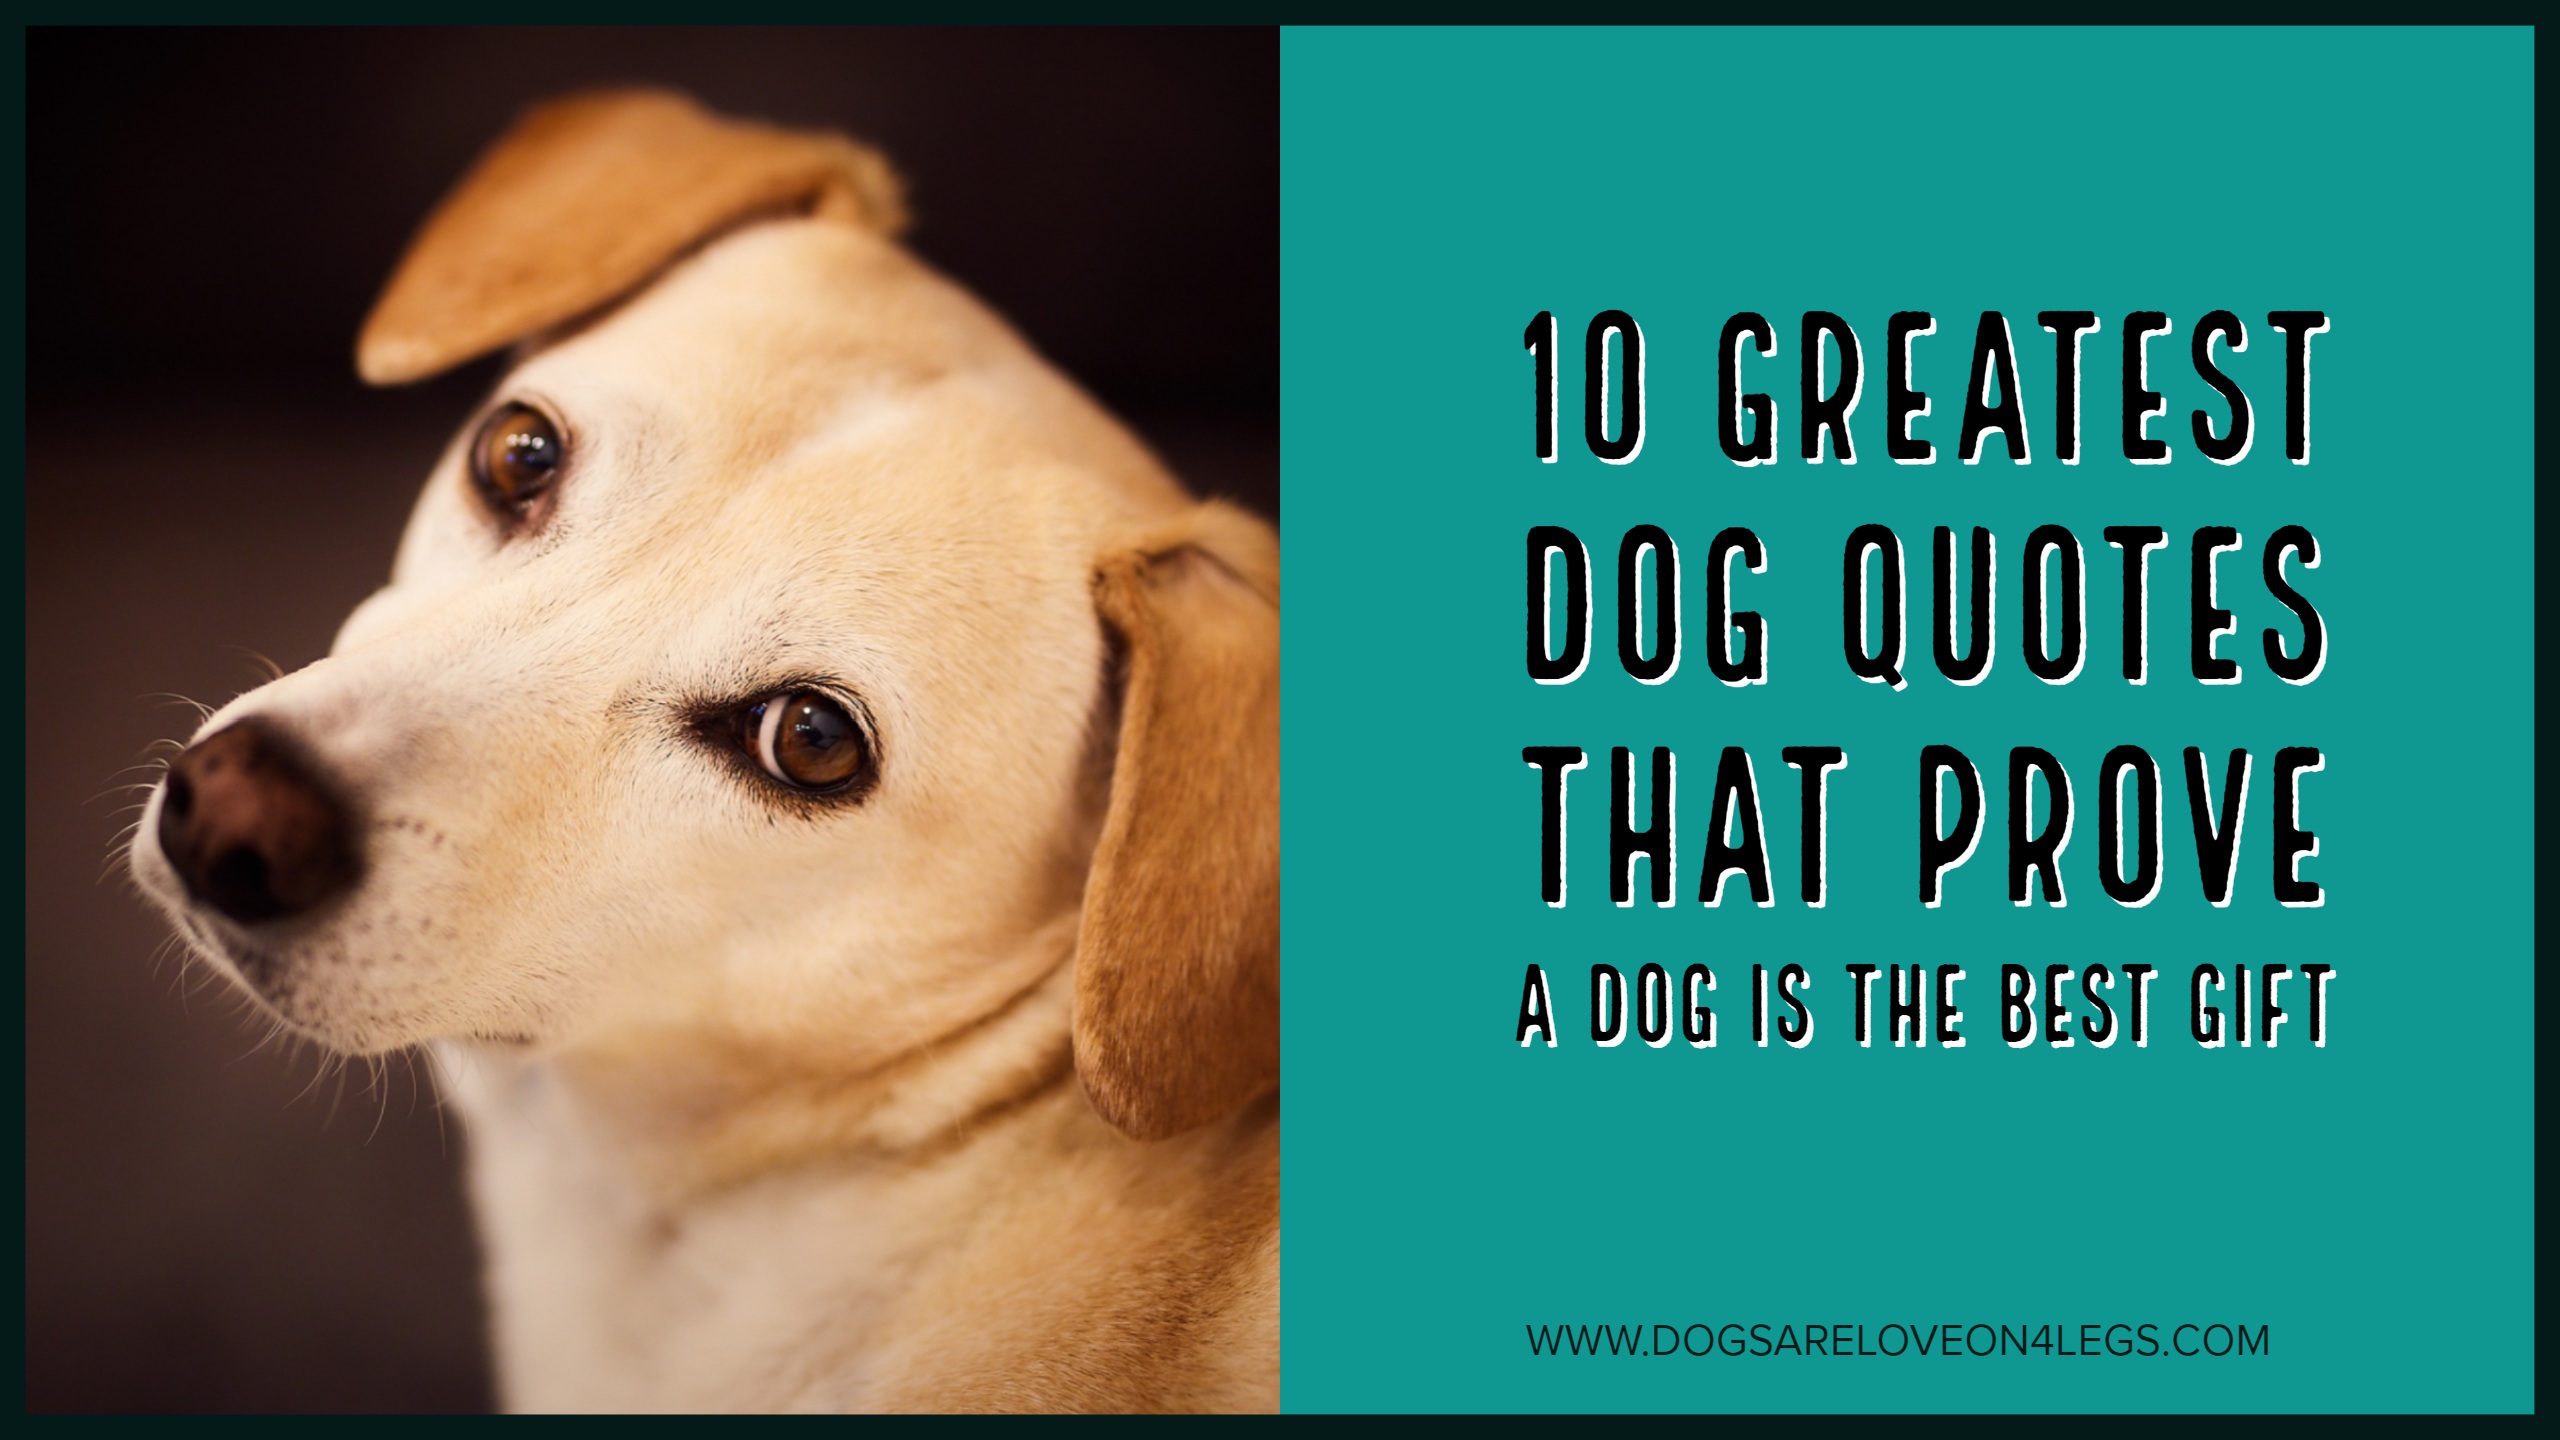 10 Greatest Dog Quotes That Prove A Dog Is The Best Gift